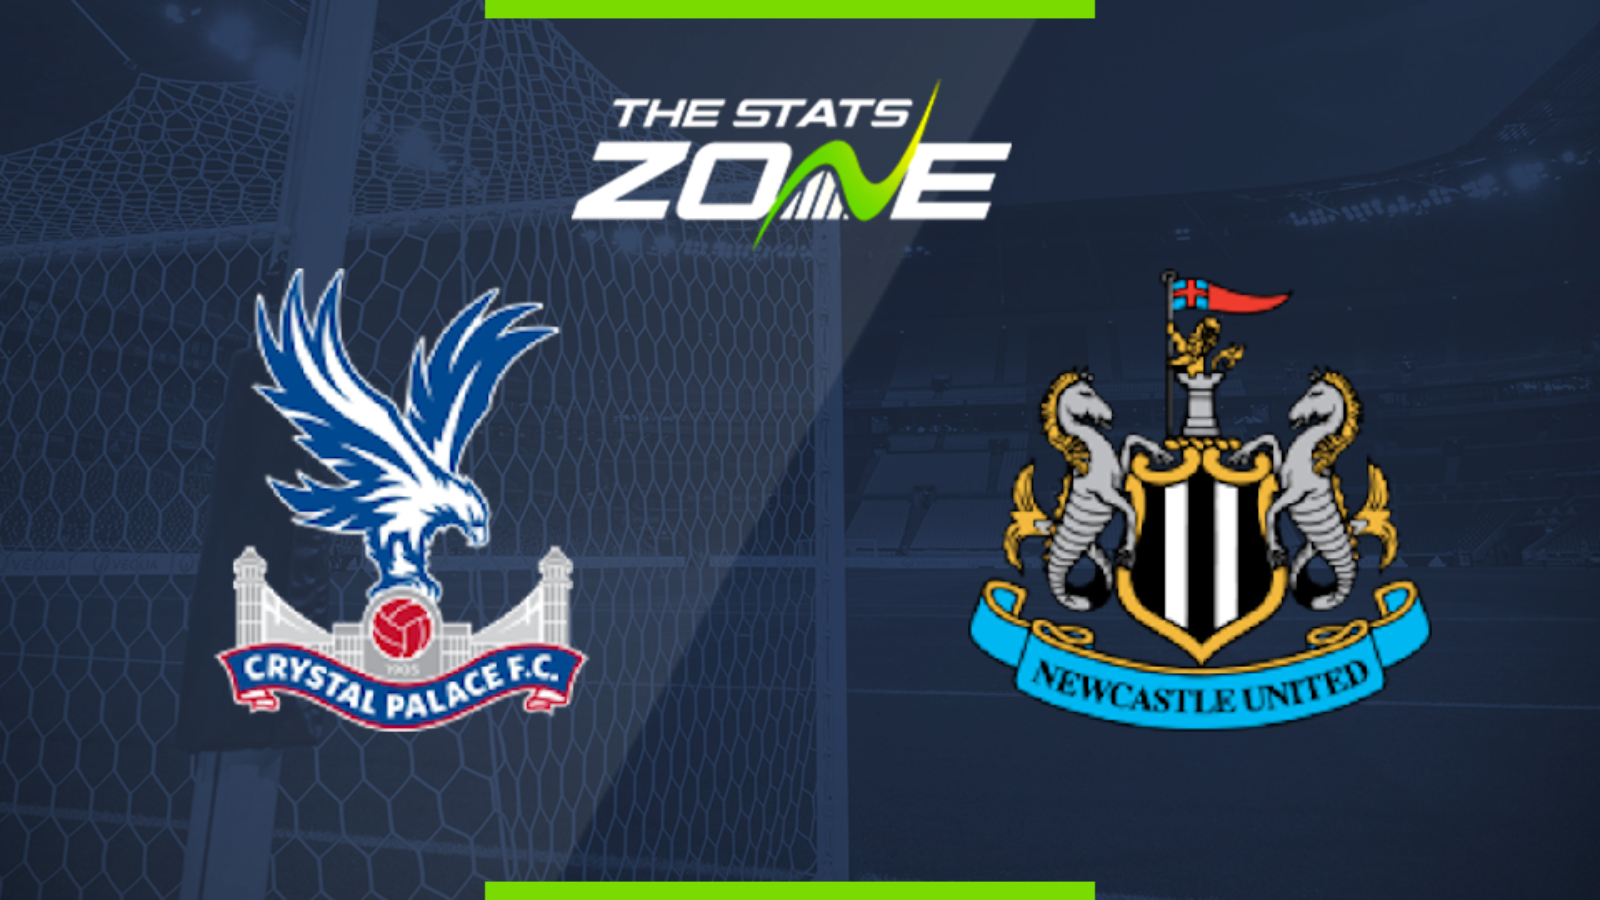 2019 20 Premier League Crystal Palace Vs Newcastle Preview Prediction The Stats Zone